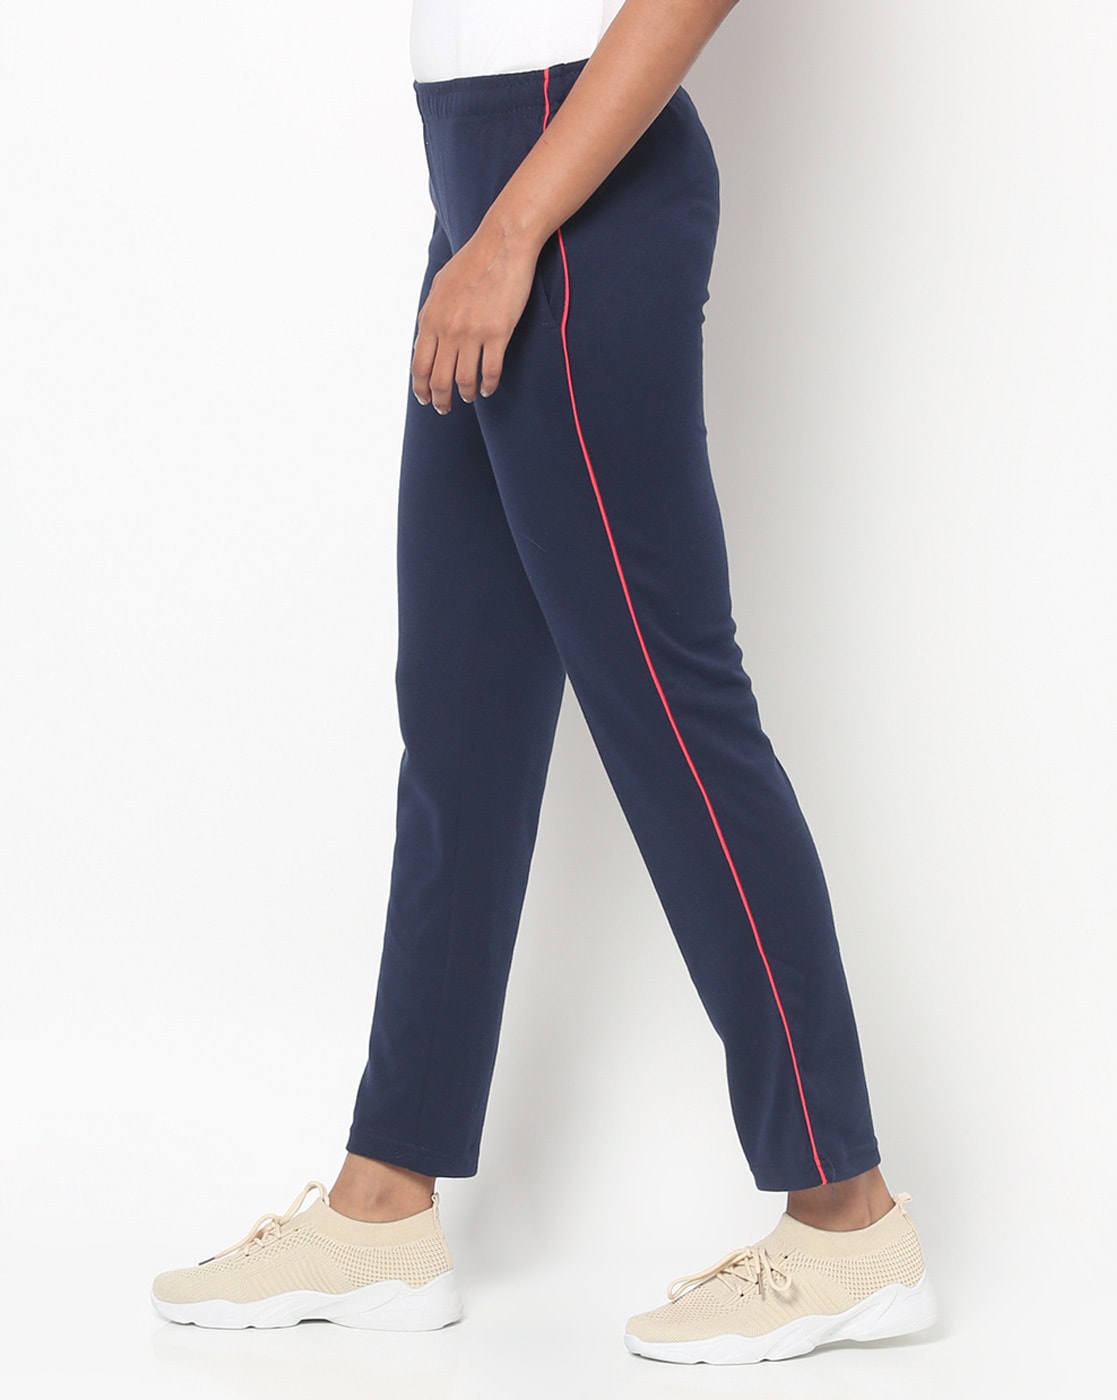 Boden Navy  Red SideStripe Exeter WideLeg Trouser Pants  Women  Best  Price and Reviews  Zulily